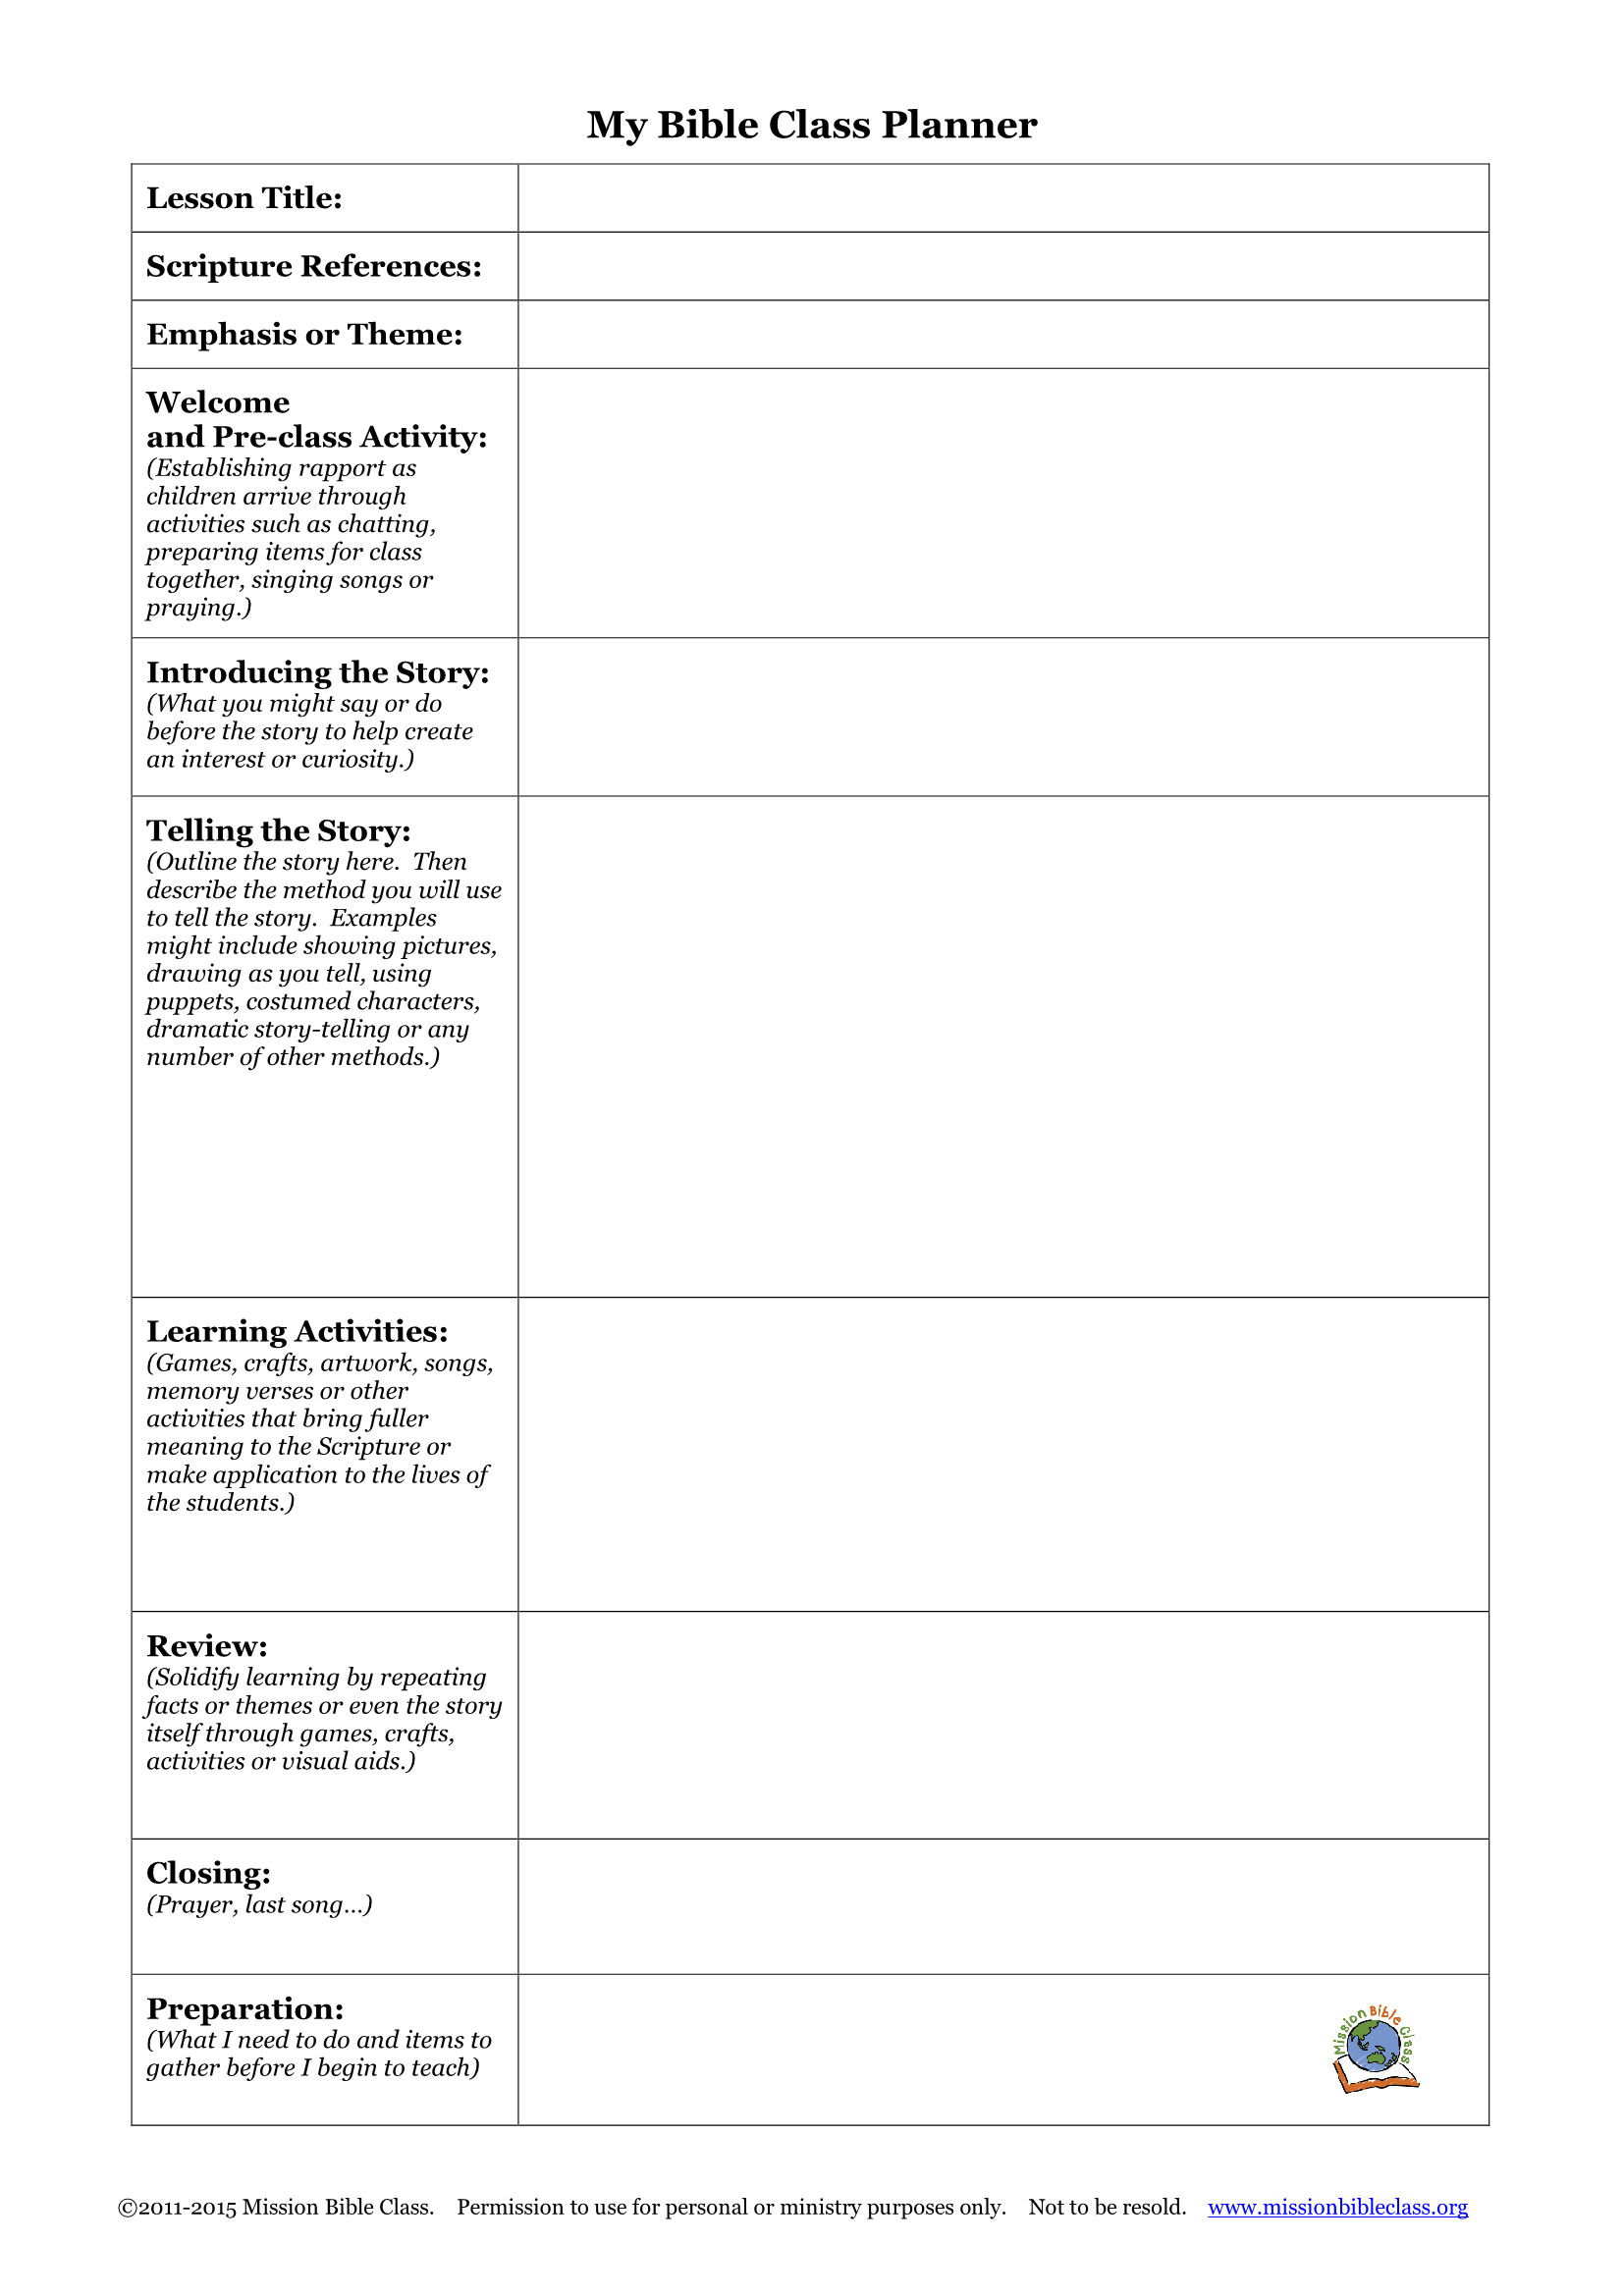 3. Click on this lesson planner if you want to print it out and then fill in by hand. Letter size paper (pdf)